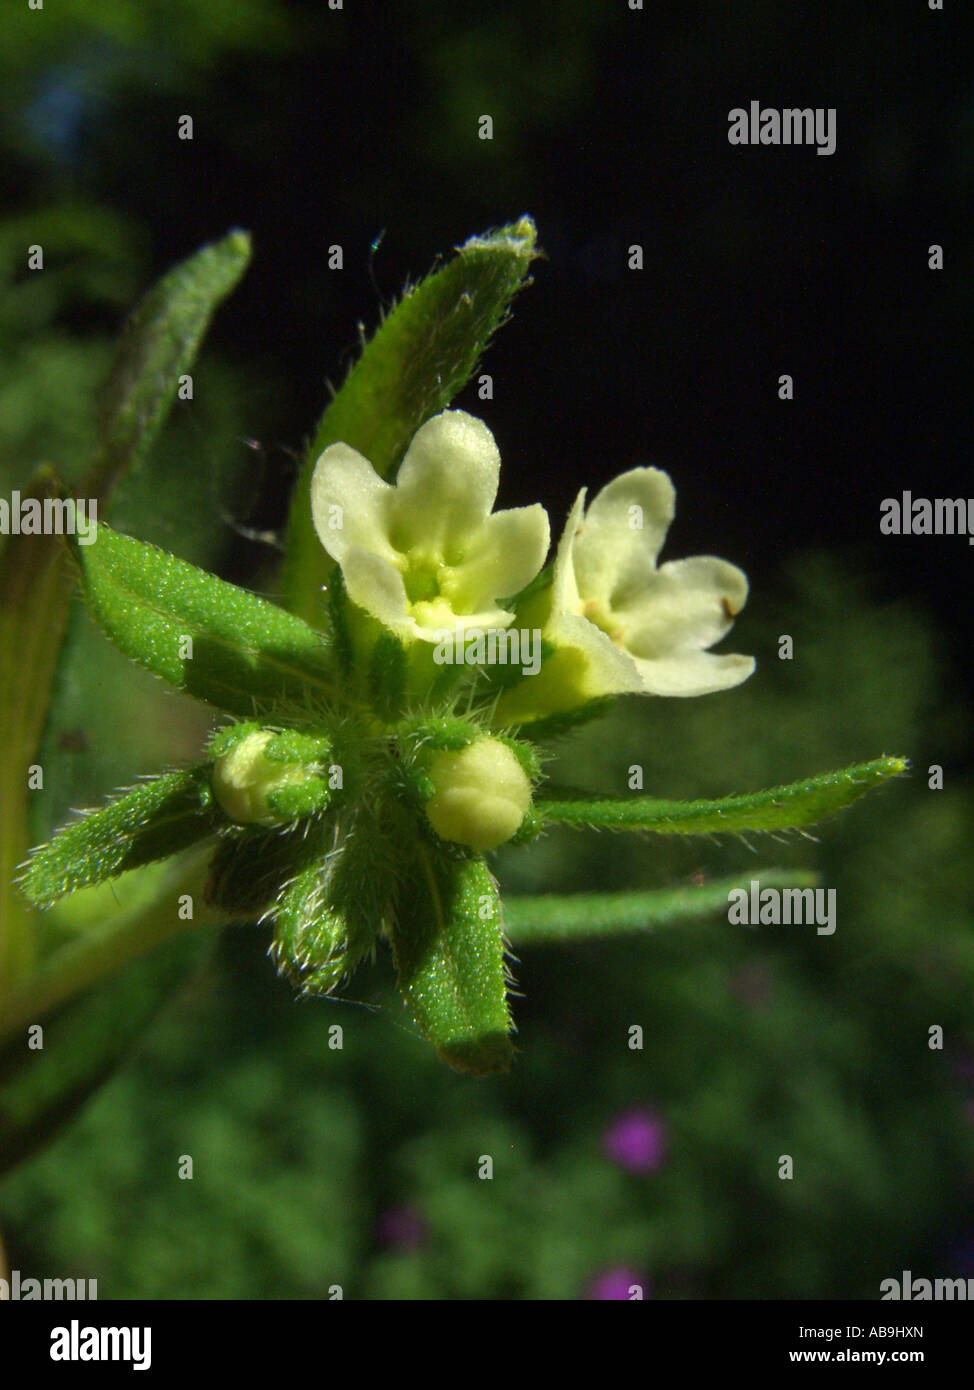 common gromwell, pearl gromwell, European gromwell (Lithospermum officinale), blooming, Germany Stock Photo